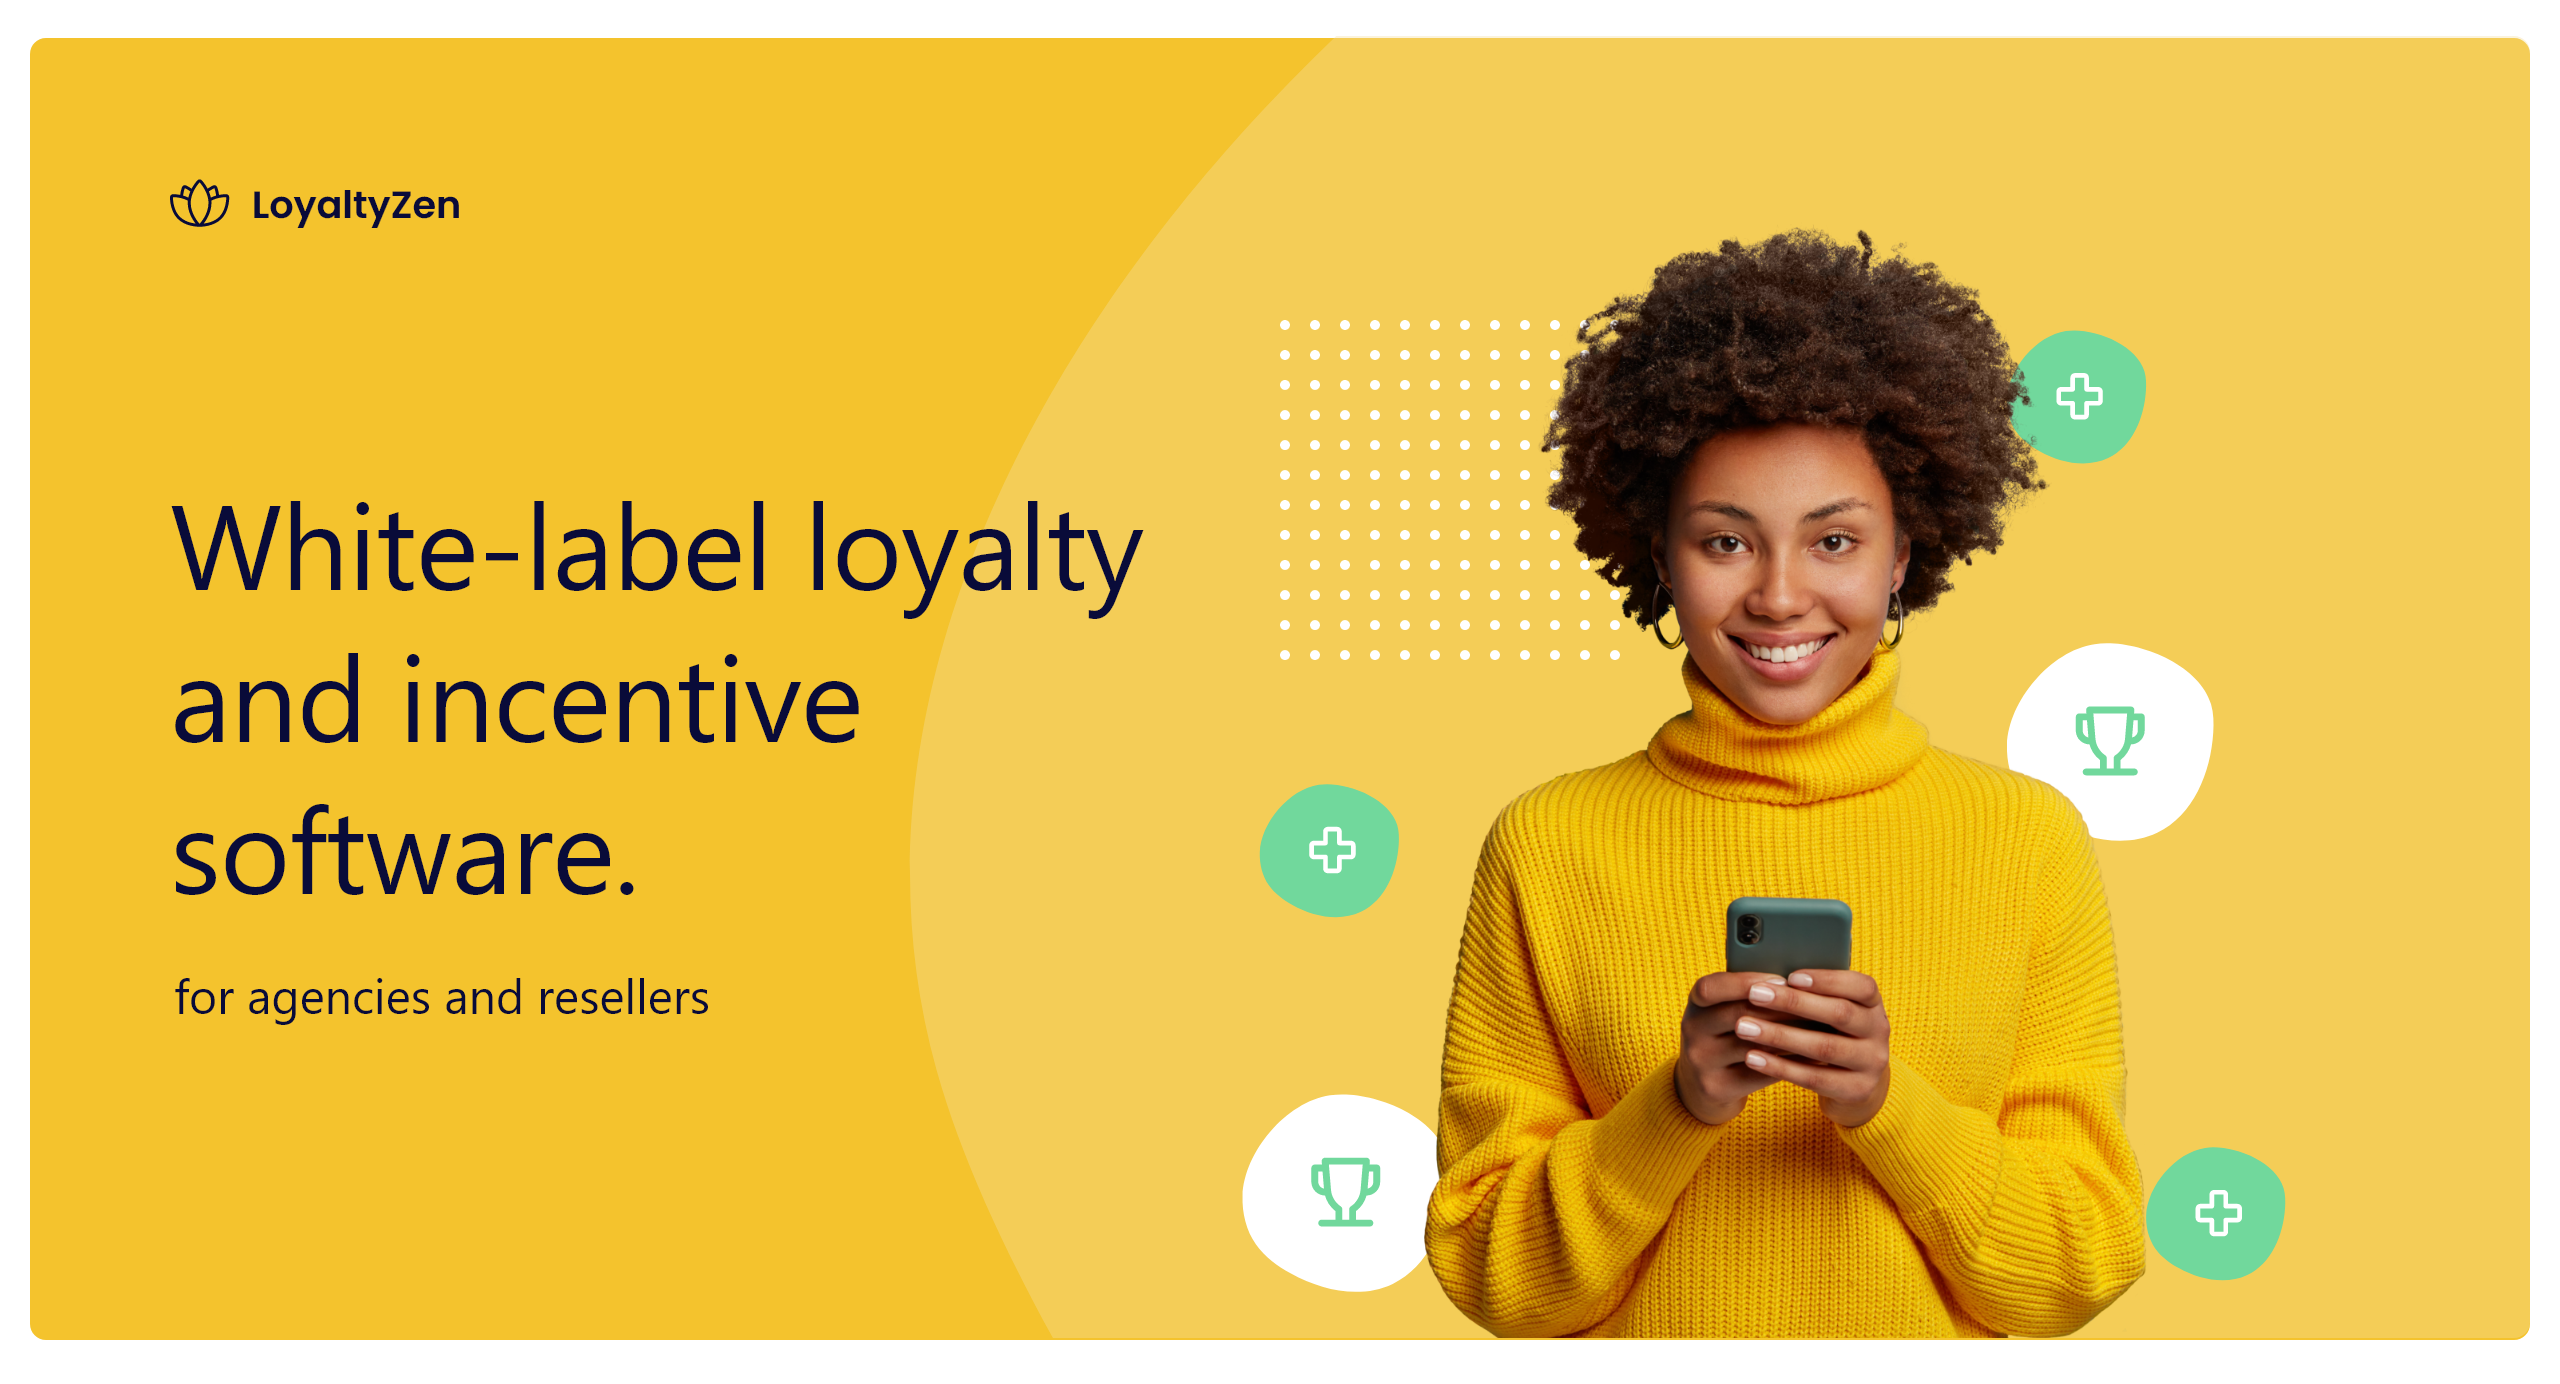 White-label loyalty and incentive platform